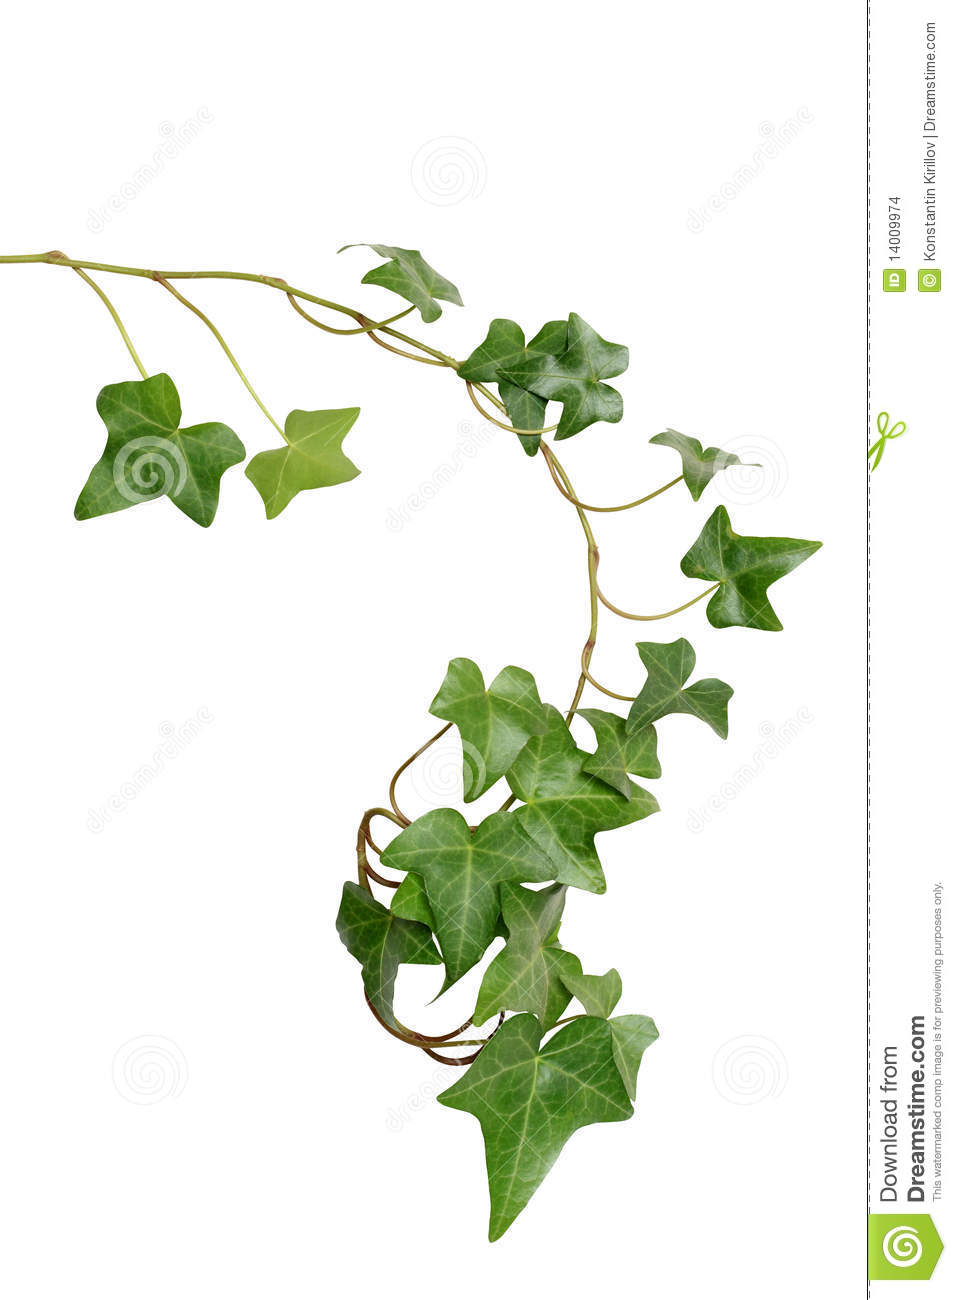 Green Ivy Stock Images   Image  14009974